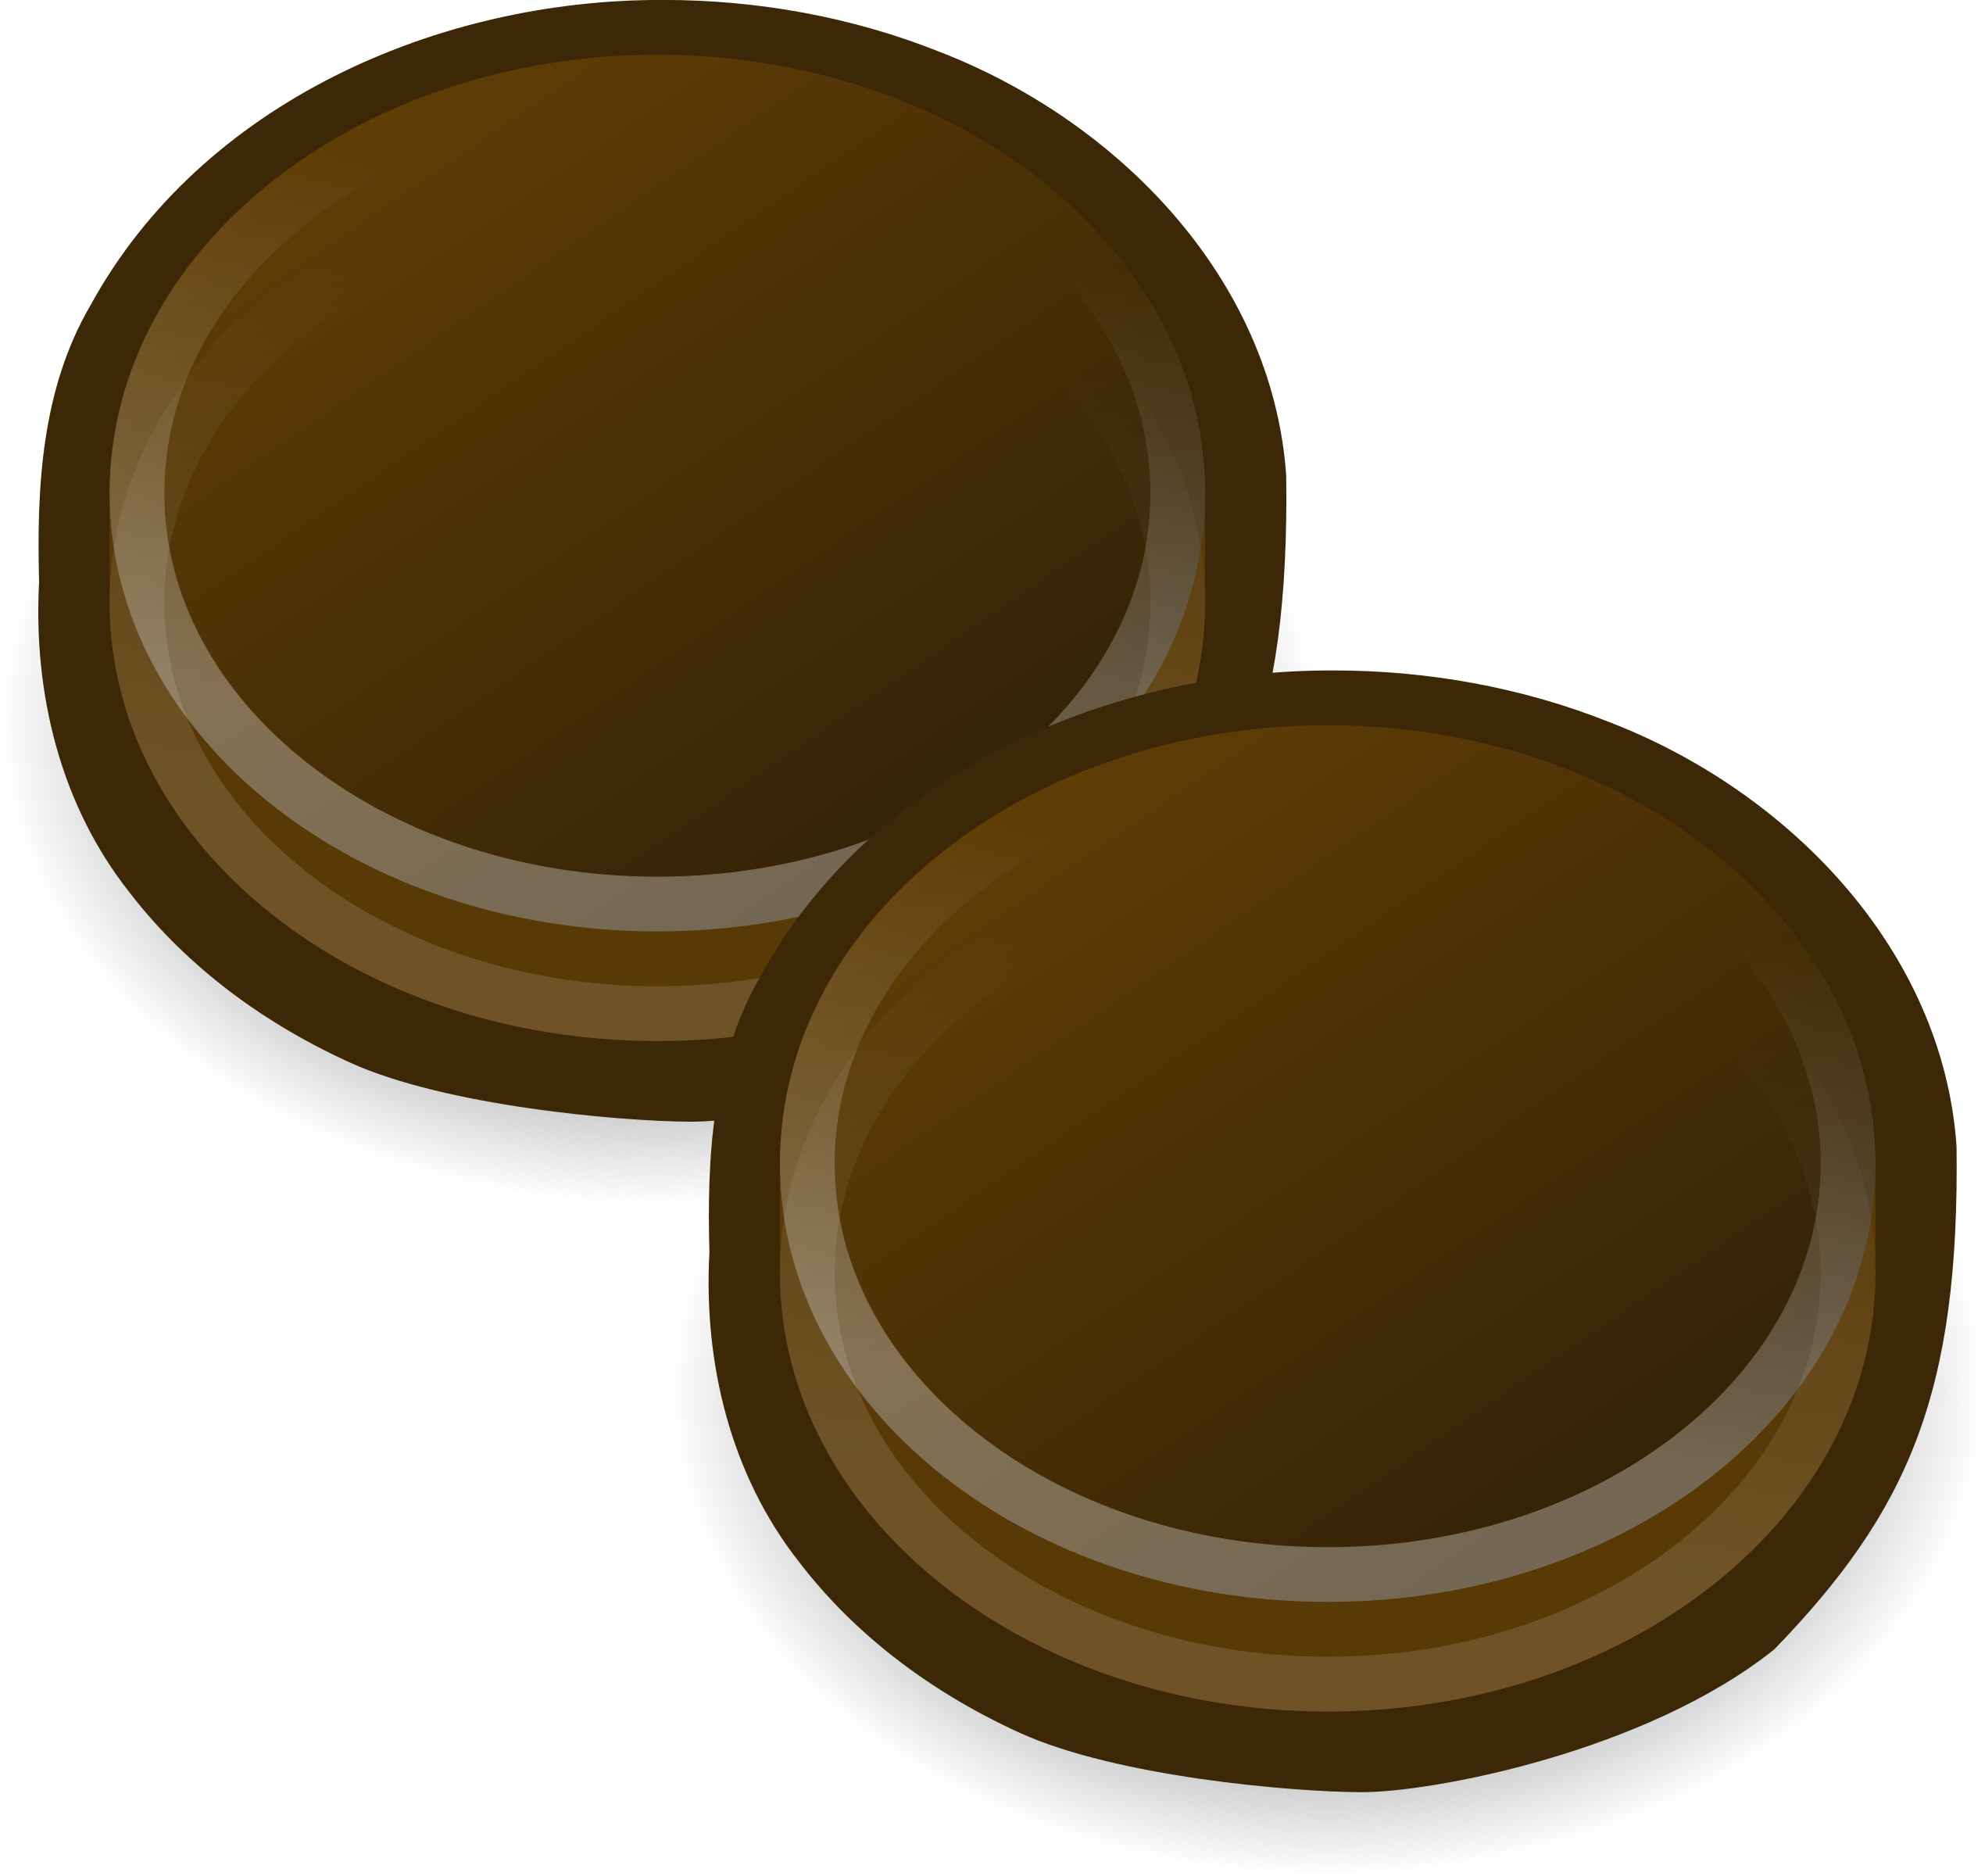 Coffee grounds SVG Clip arts